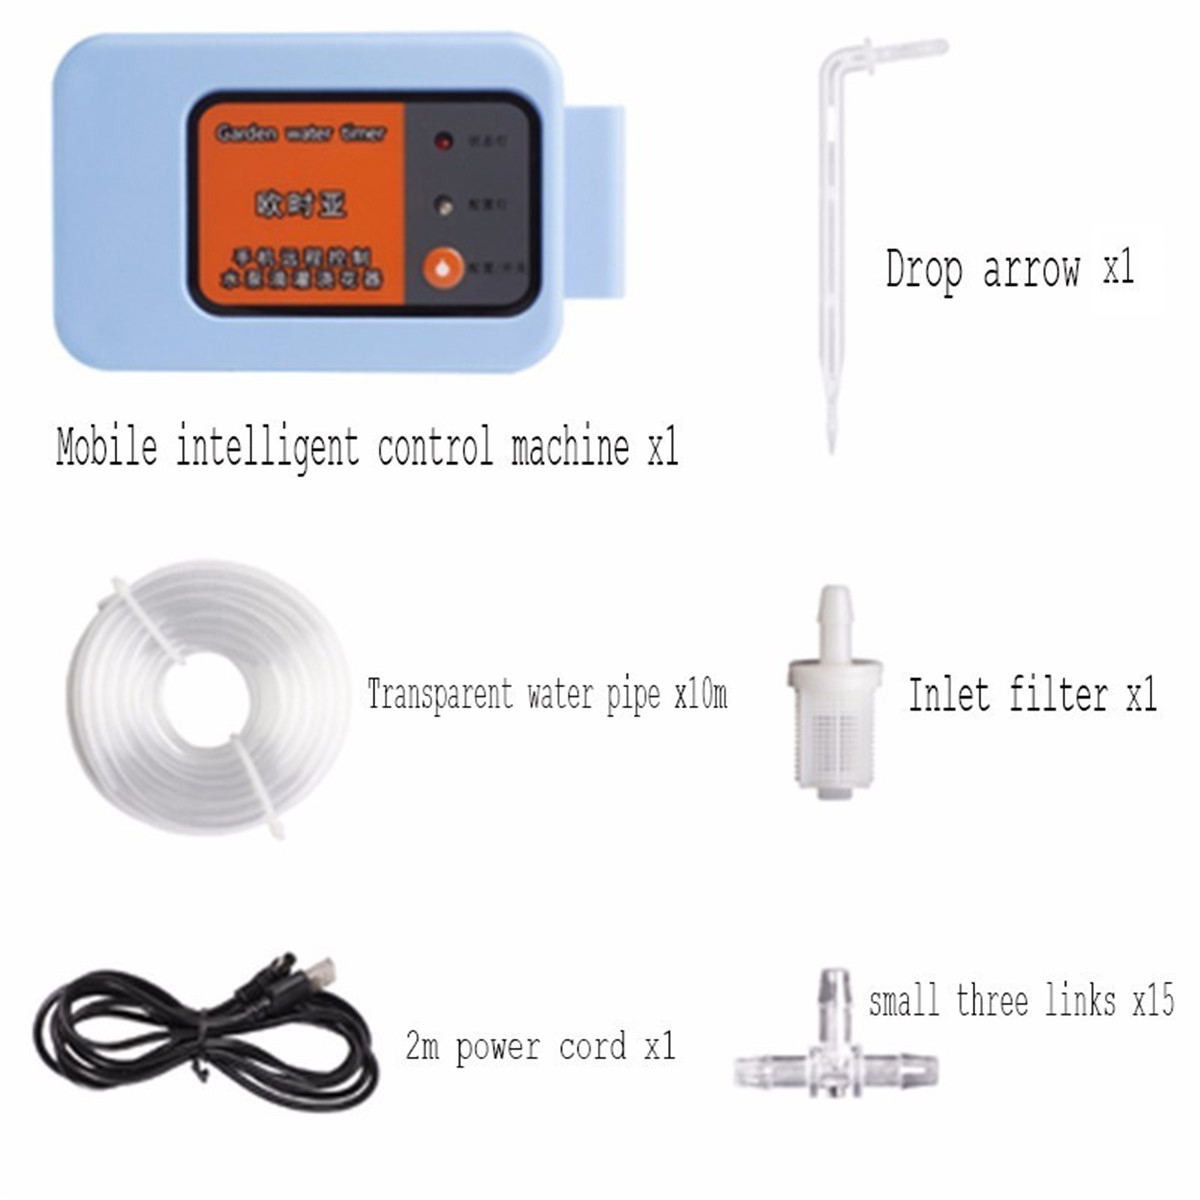 Automatic-Watering-Device-Phone-Control-Irrigation-System-Irrigation-Computer-Irrigation-Timer-with--1580072-5